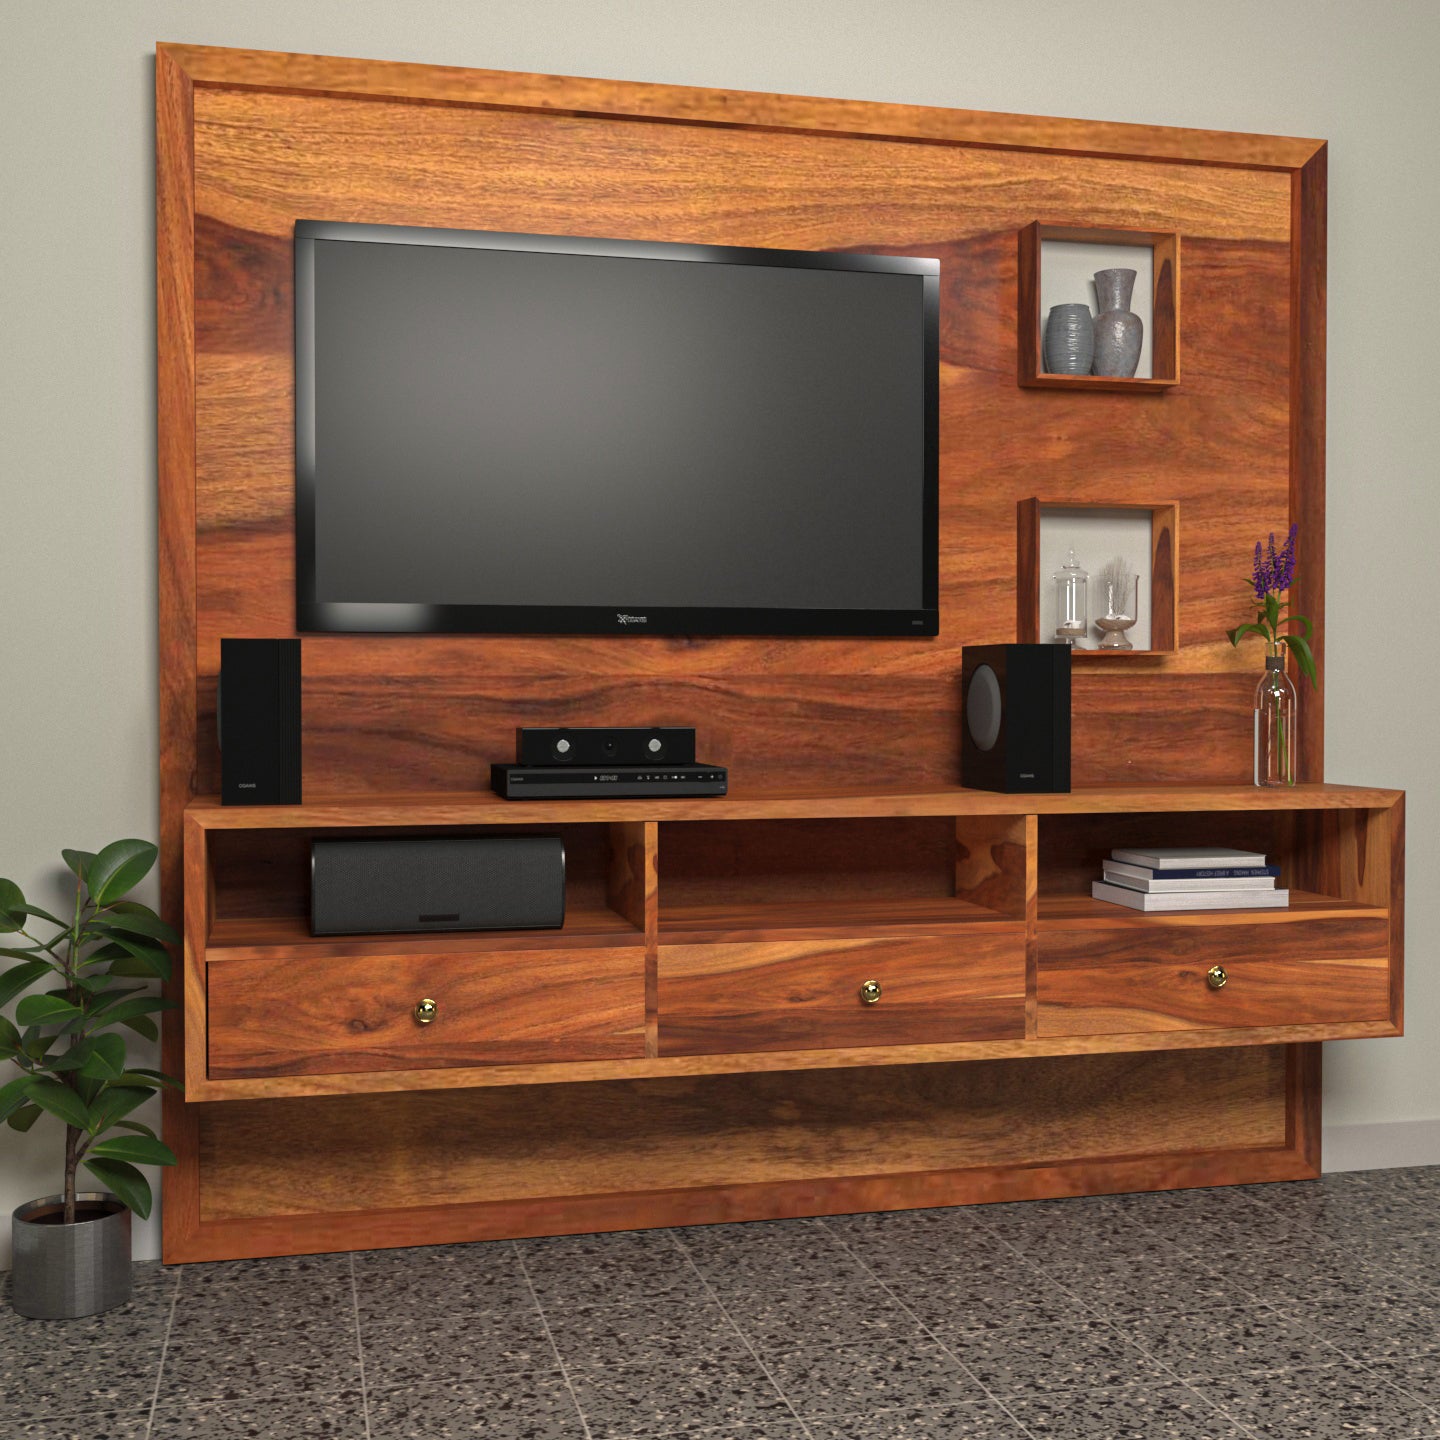 Modern Vintage Style Handmade Wooden TV Unit for Home Tv stand